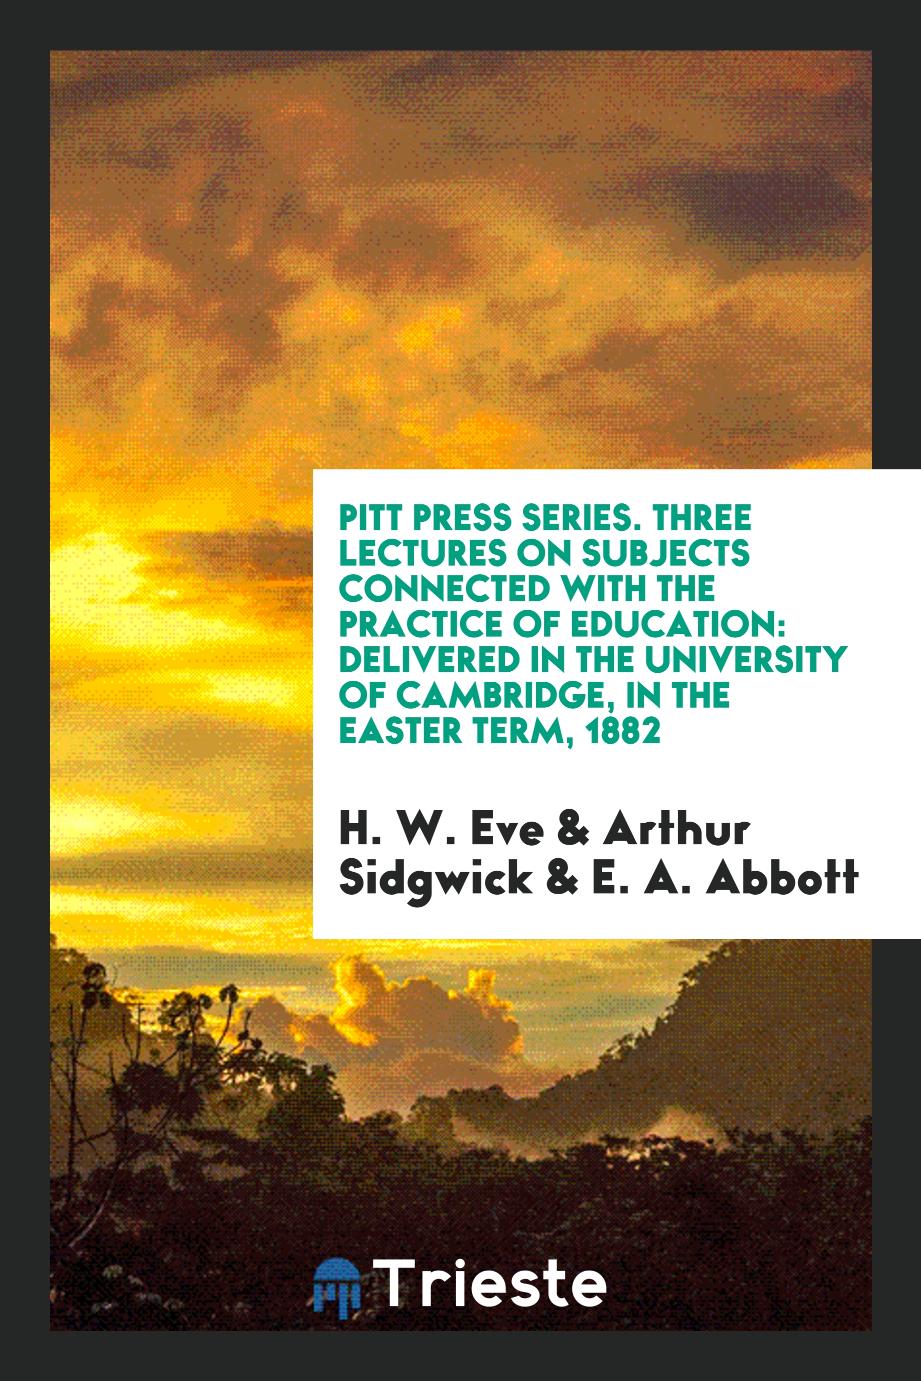 Pitt Press Series. Three Lectures on Subjects Connected with the Practice of Education: Delivered in the University of Cambridge, in the Easter Term, 1882